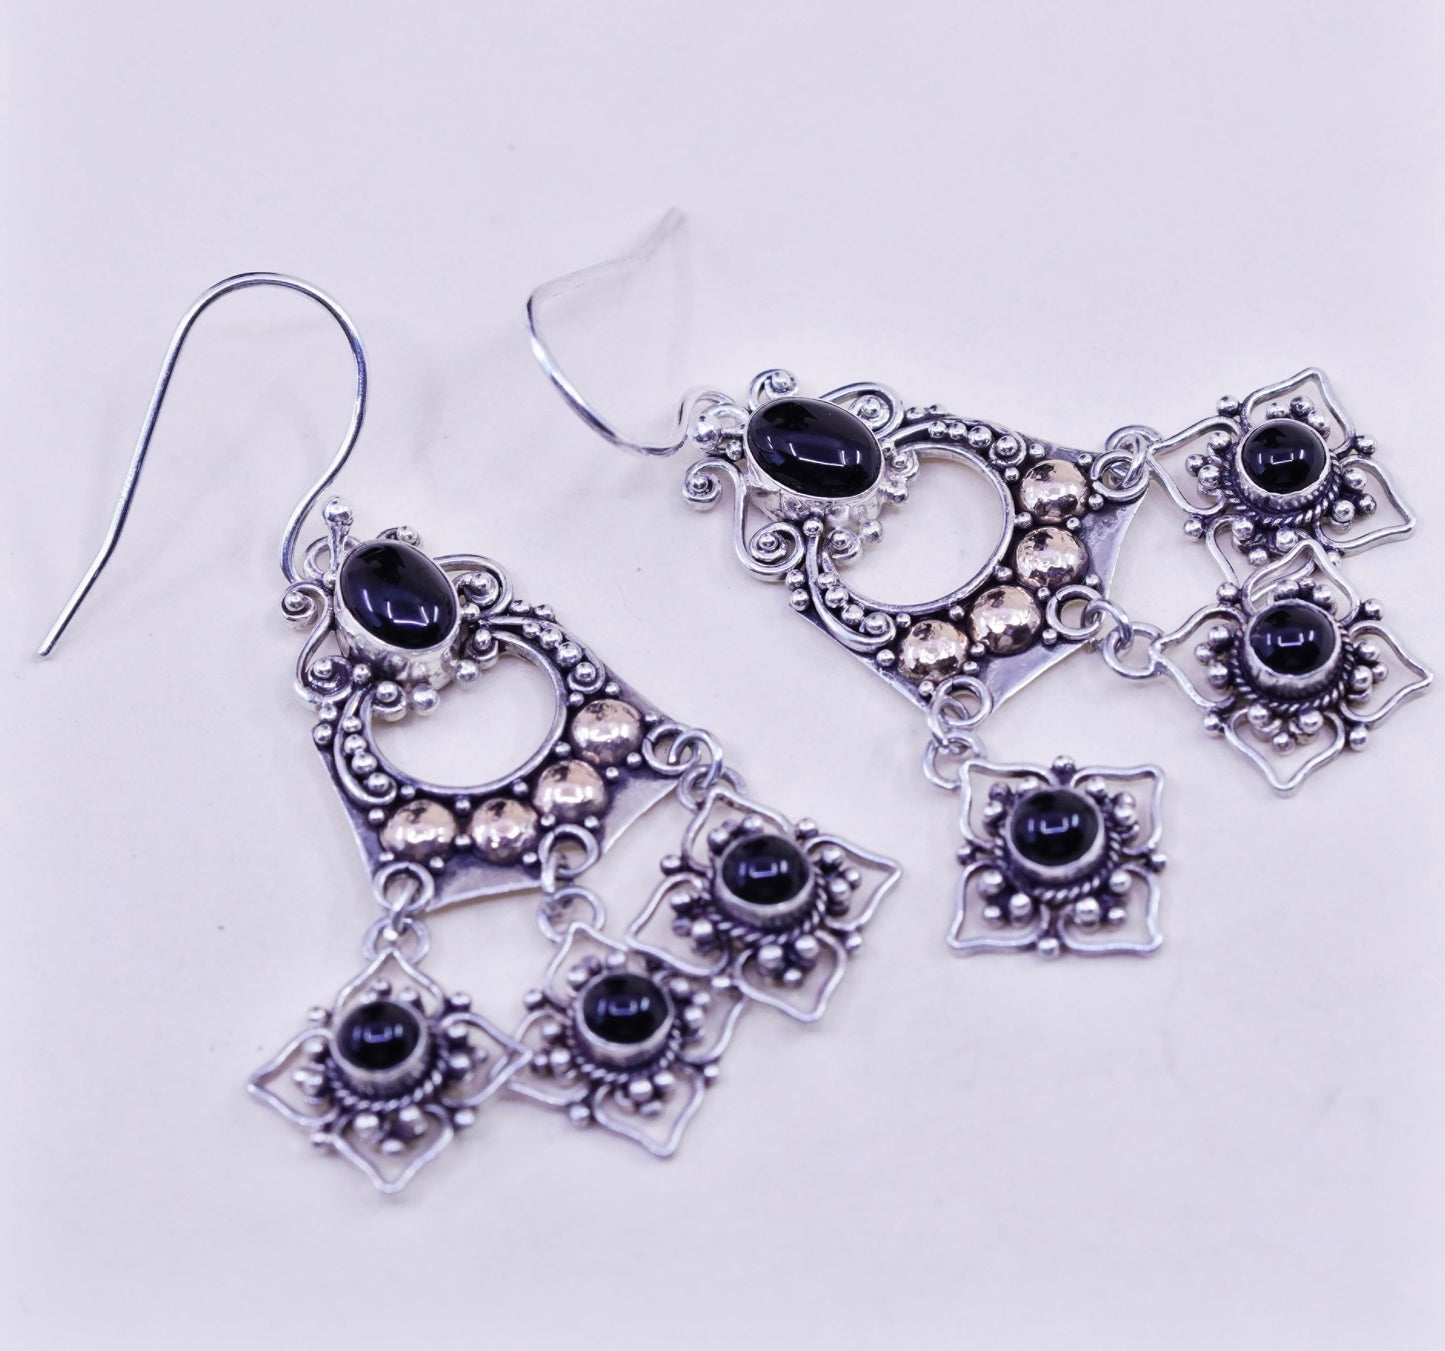 Vintage two tone Sterling 925 silver handmade earrings with obsidian and beads